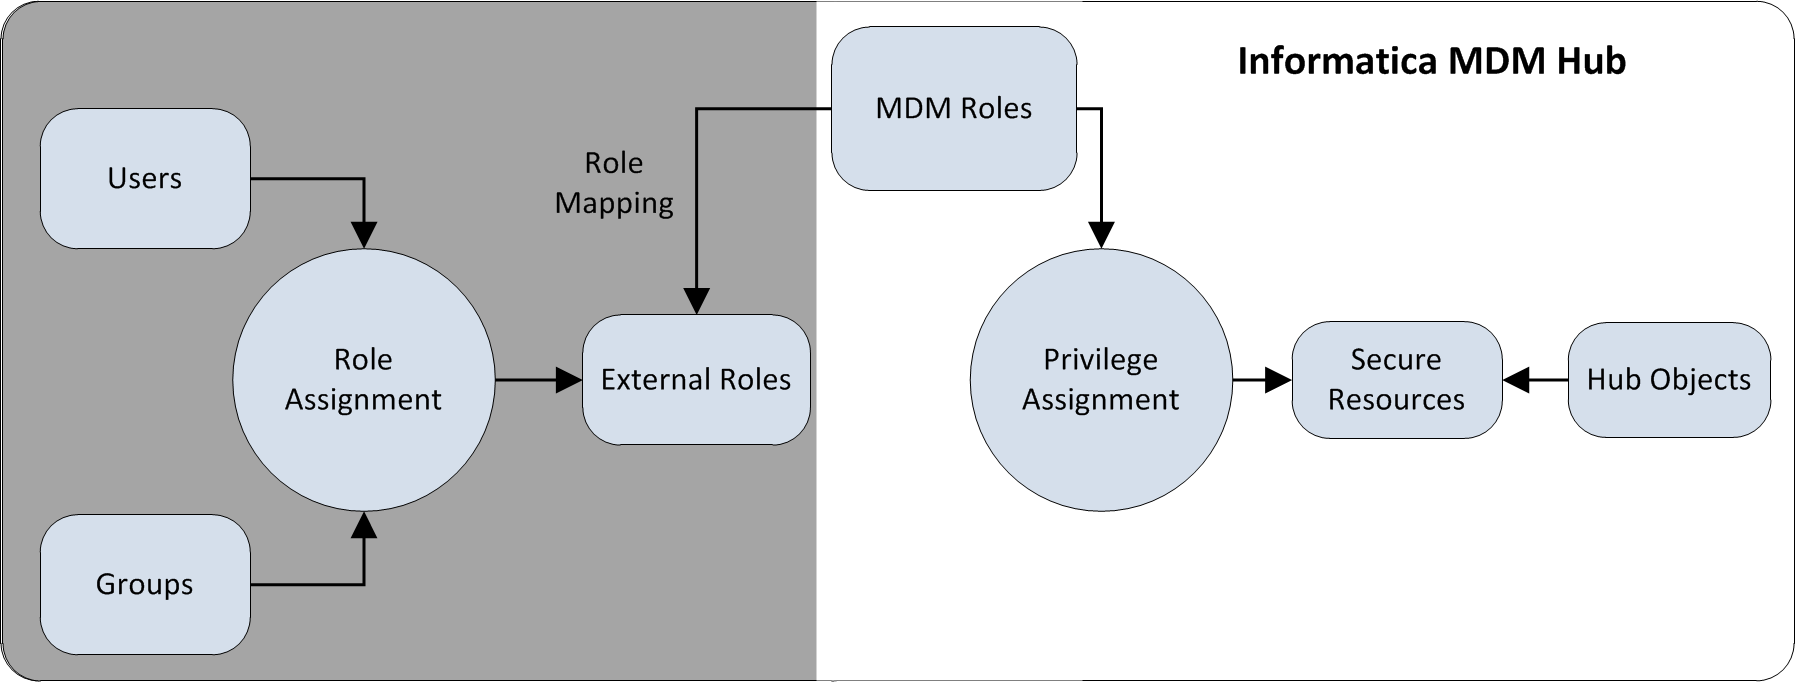 An illustration showing security deployment with external role assignment. External to the MDM Hub, users and groups can perform role assignment, which leads to the creation of external roles. The external roles are mapped to MDM Hub as MDM roles. The MDM Hub handles all MDM roles, privilege assignment, secure resources, and Hub objects.
			 